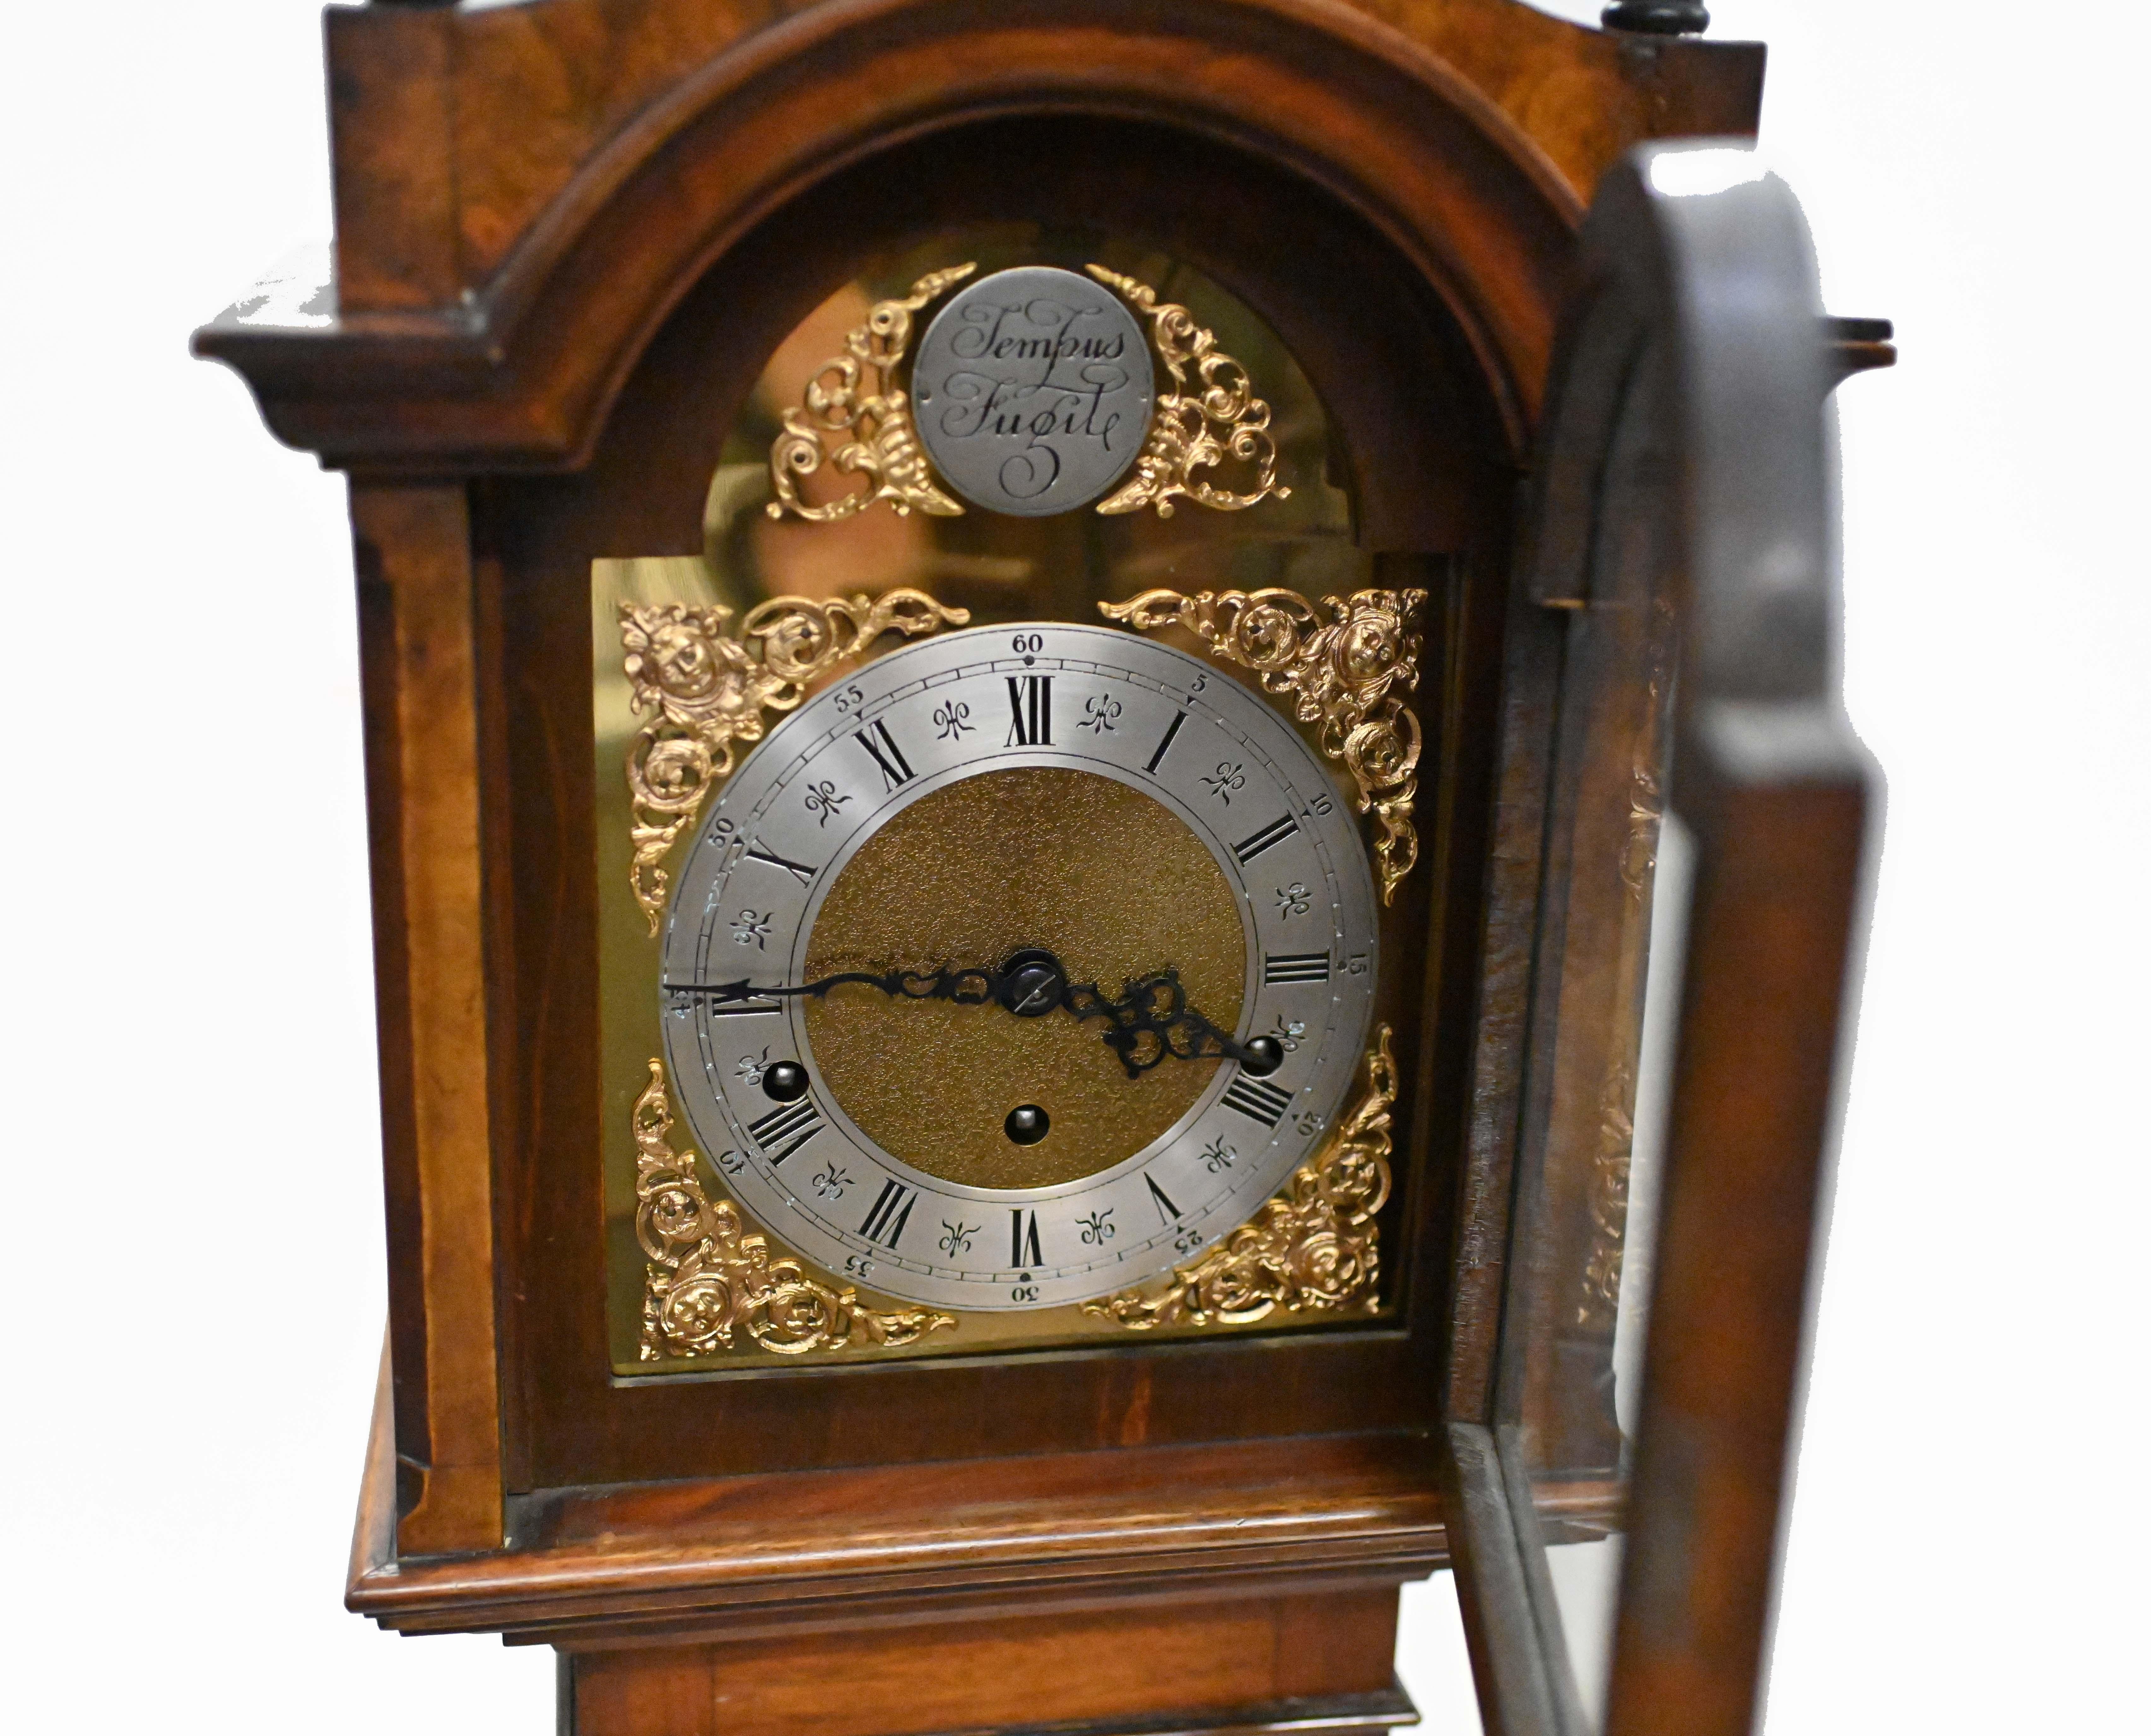 A wonderful Grandmother clock crafted from walnut
Brass arch dial face reads the inscription 'Tempus Fugit' - Latin for time flies
Great chiming clock we date to circa 1930
Offered in great condition ready for home use right away
Will ship to